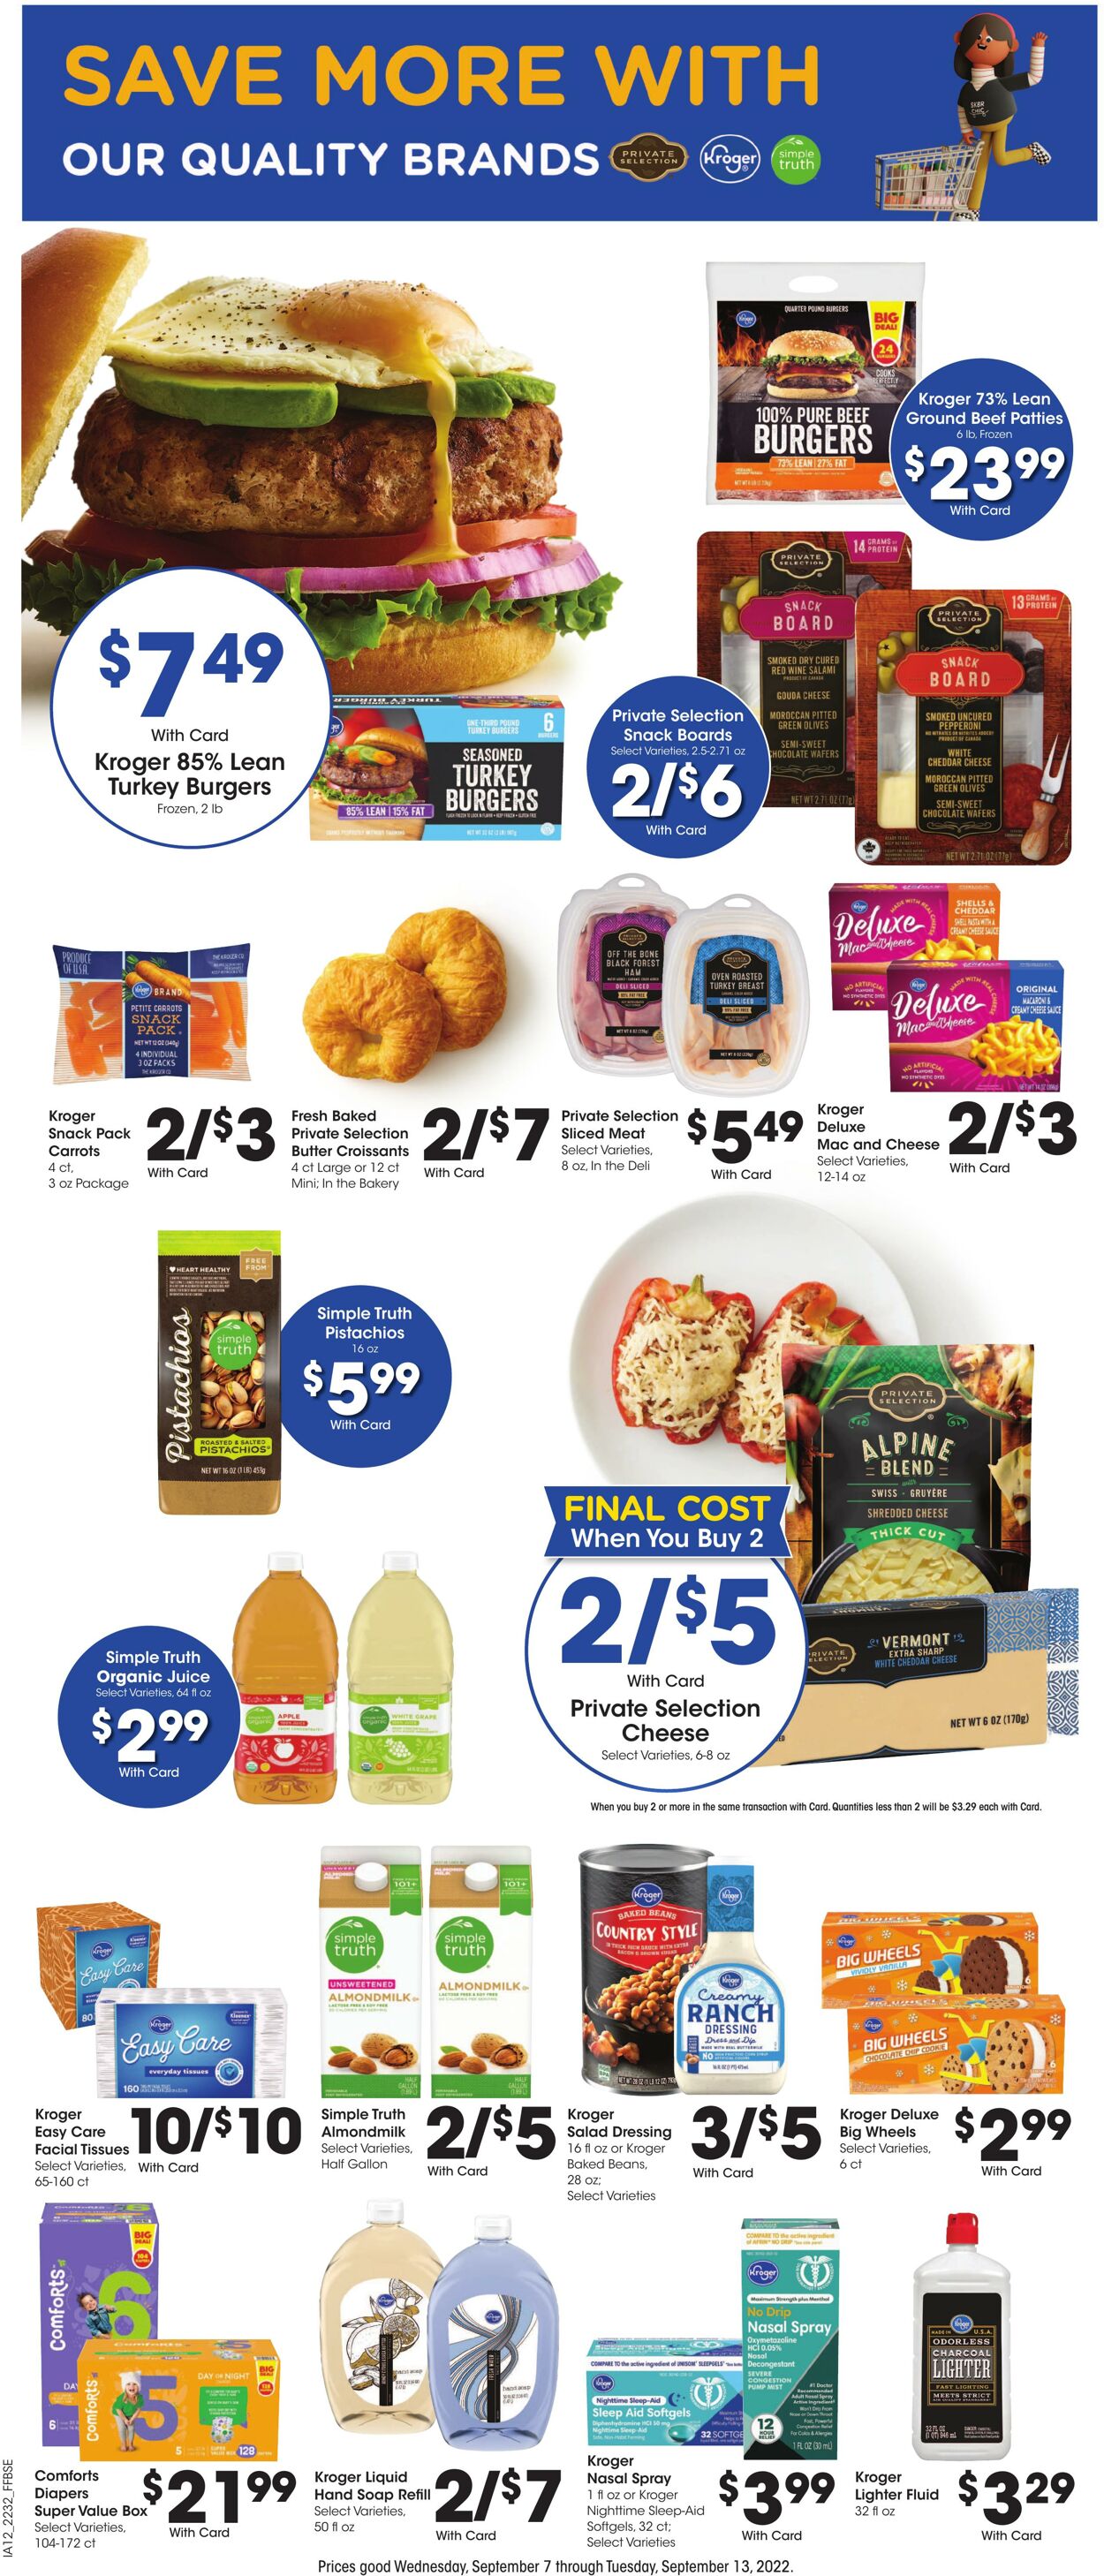 Weekly ad Fry's 09/07/2022 - 09/13/2022